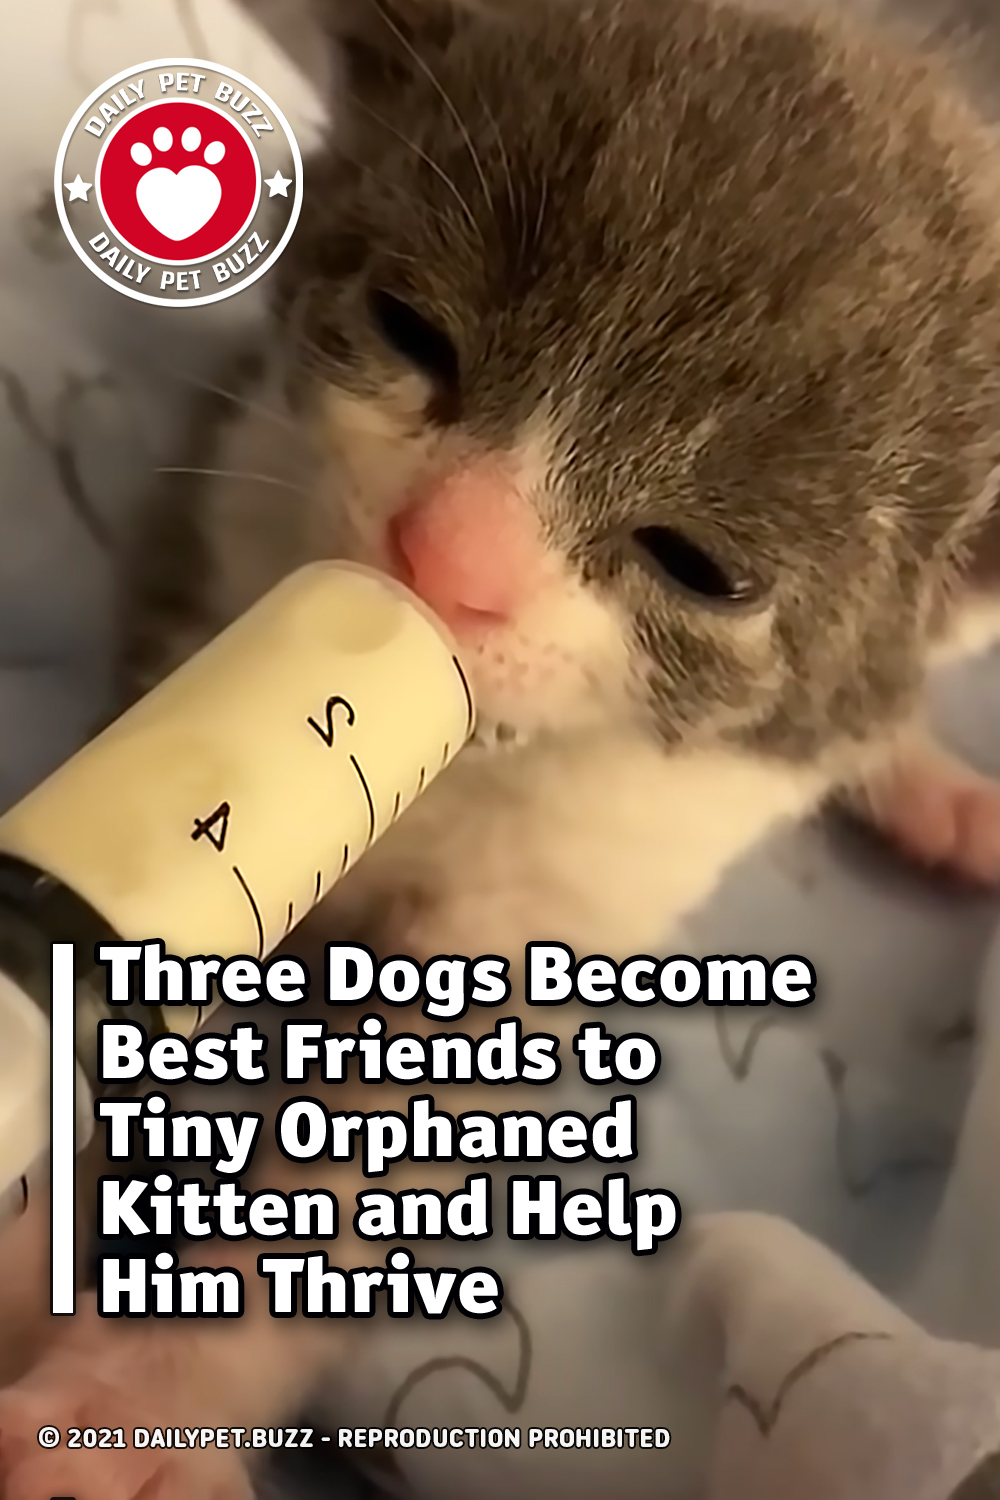 Three Dogs Become Best Friends to Tiny Orphaned Kitten and Help Him Thrive